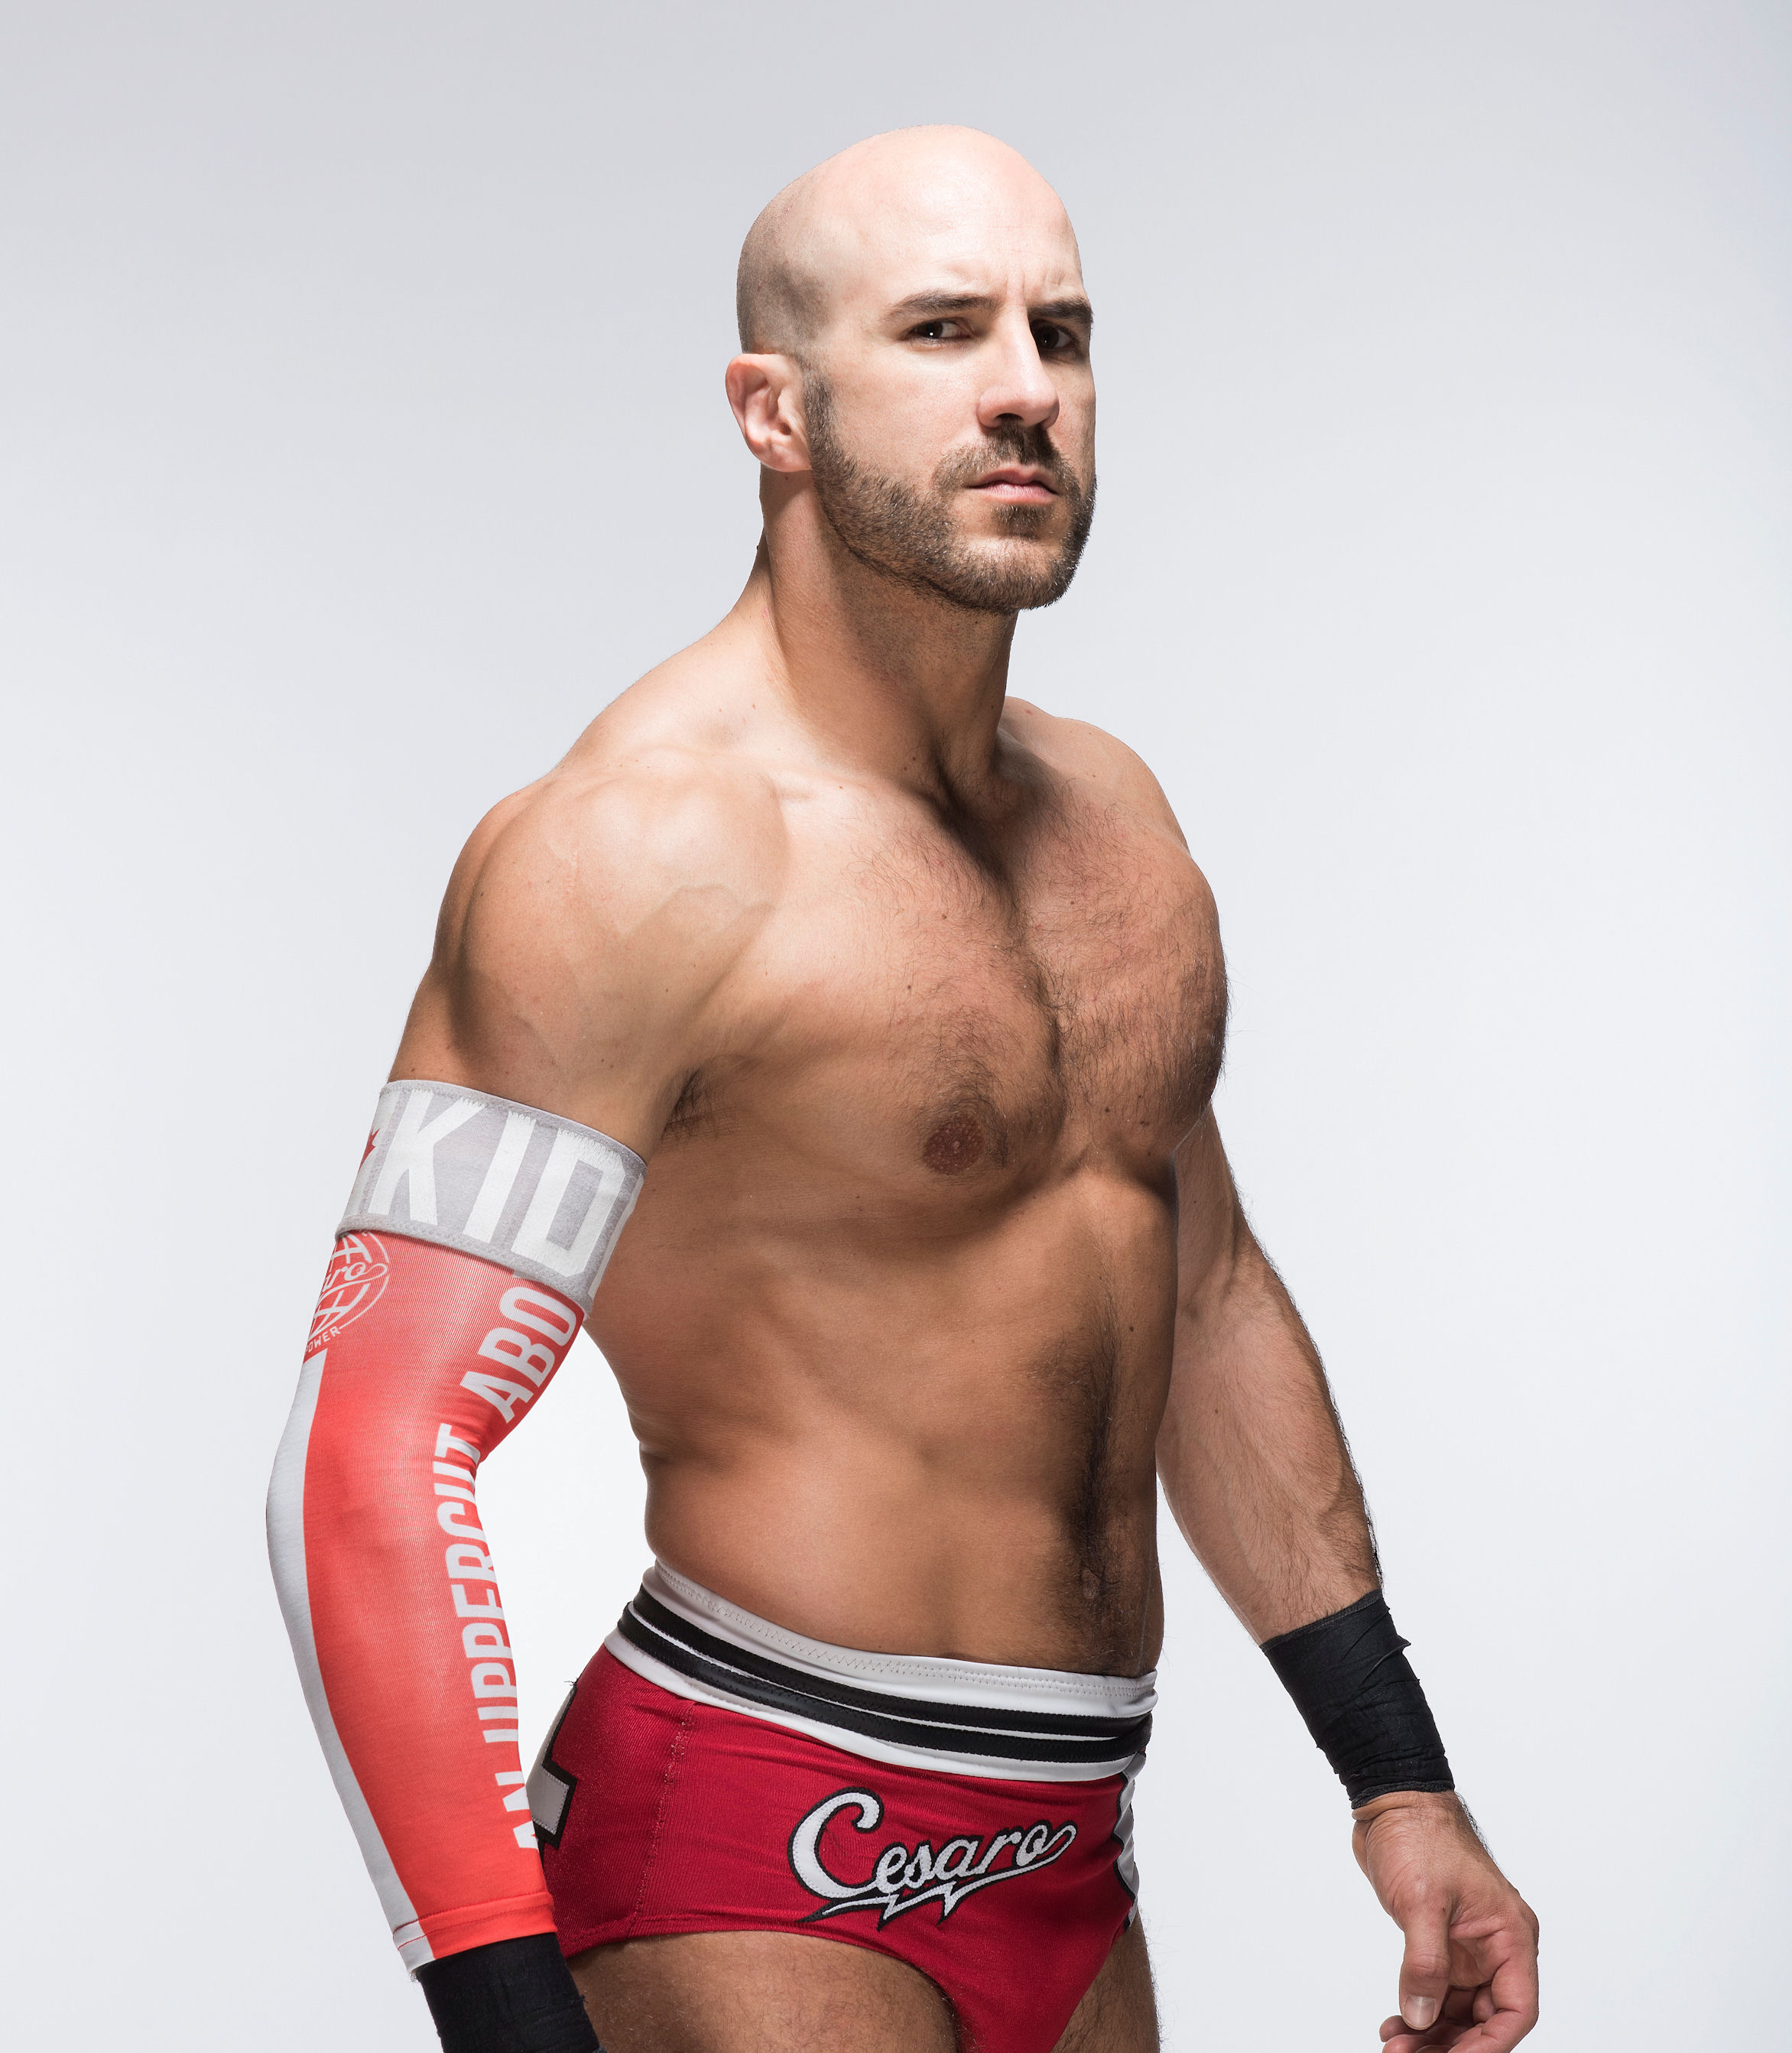 WWE Superstar Cesaro Talks About His Injury and Relationship With Sheamus on Morgan in the Morning [VIDEO]